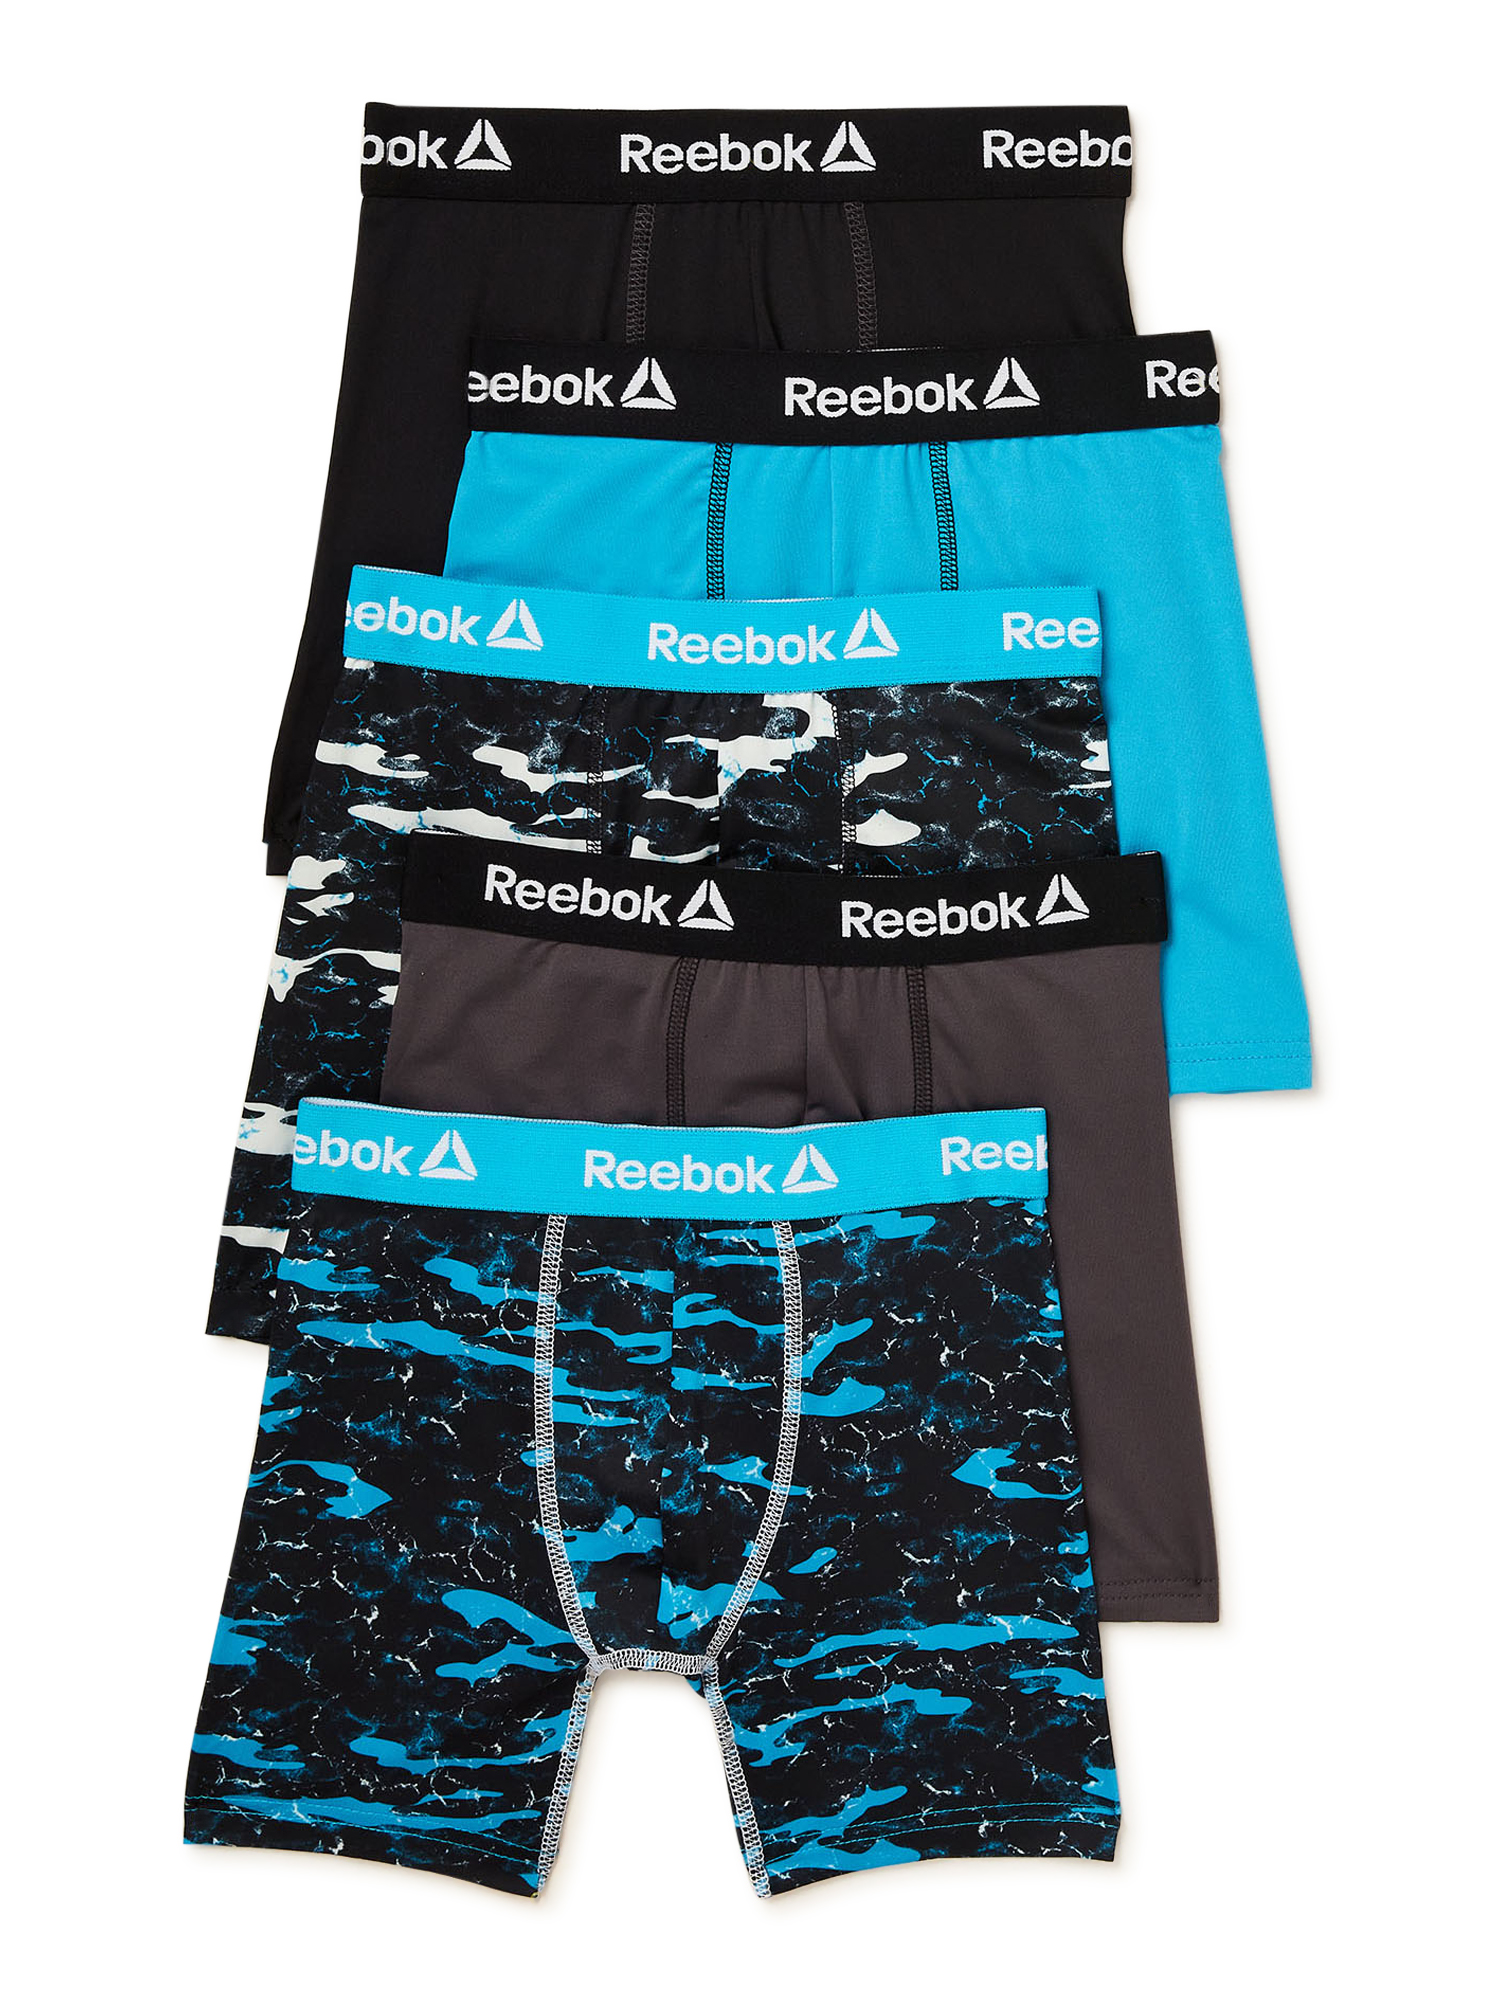 Reebok Boys Performance Boxer Briefs, 5-Pack - image 1 of 4